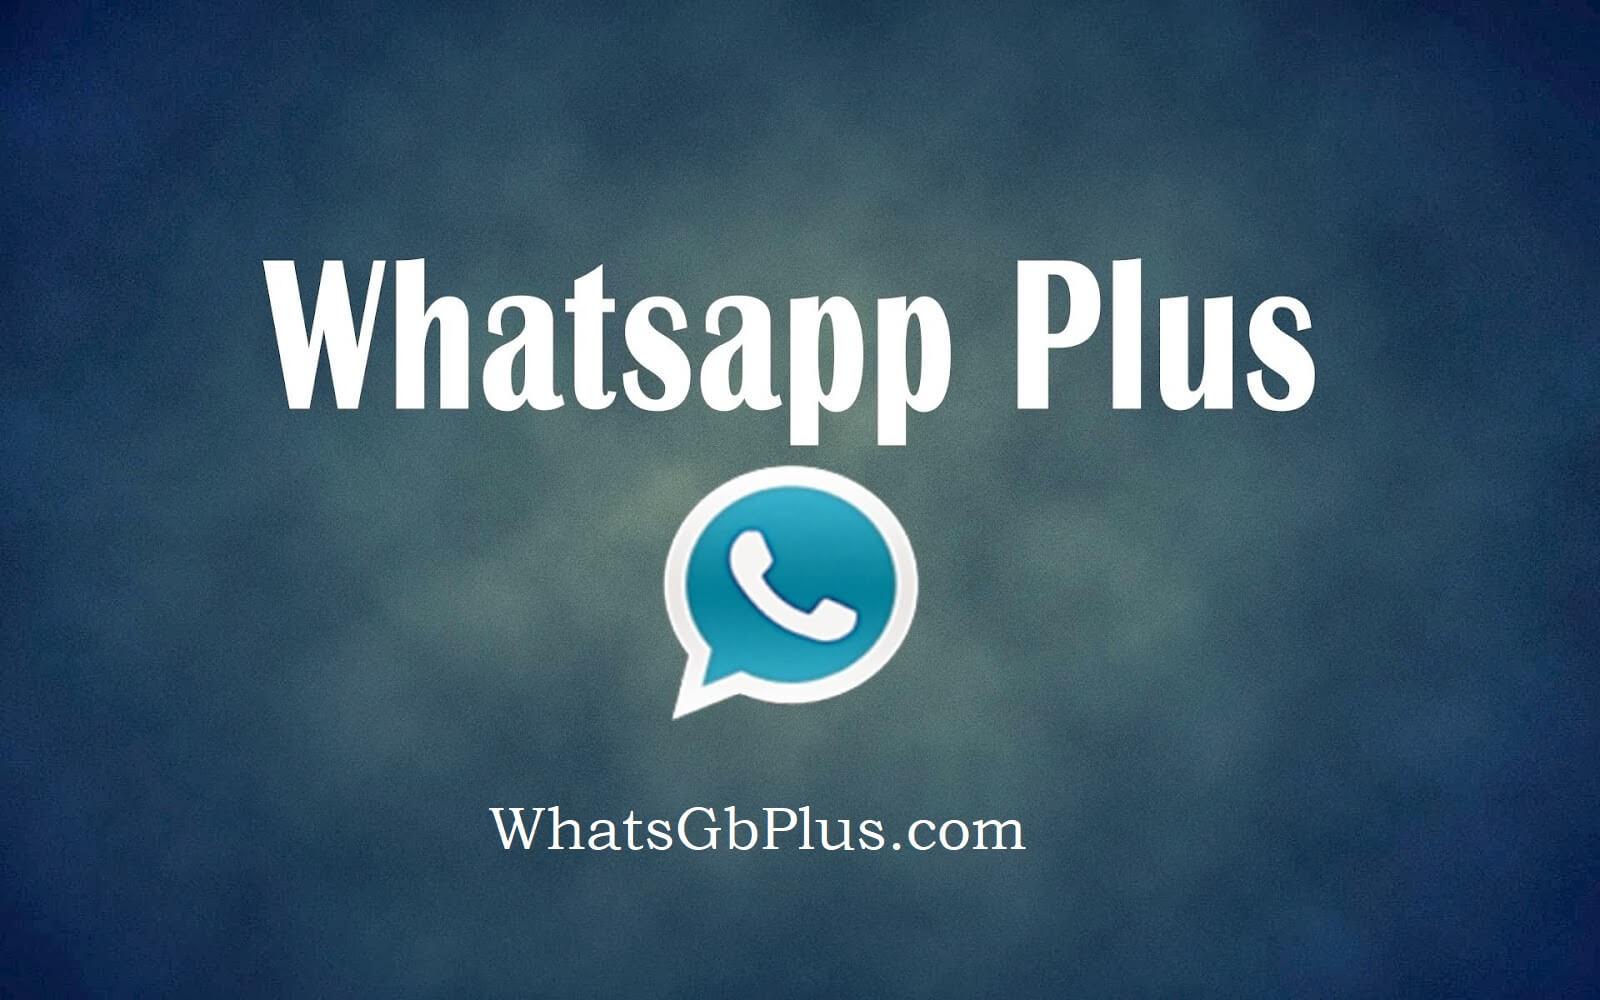 Whatsapp Plus - another malicious app